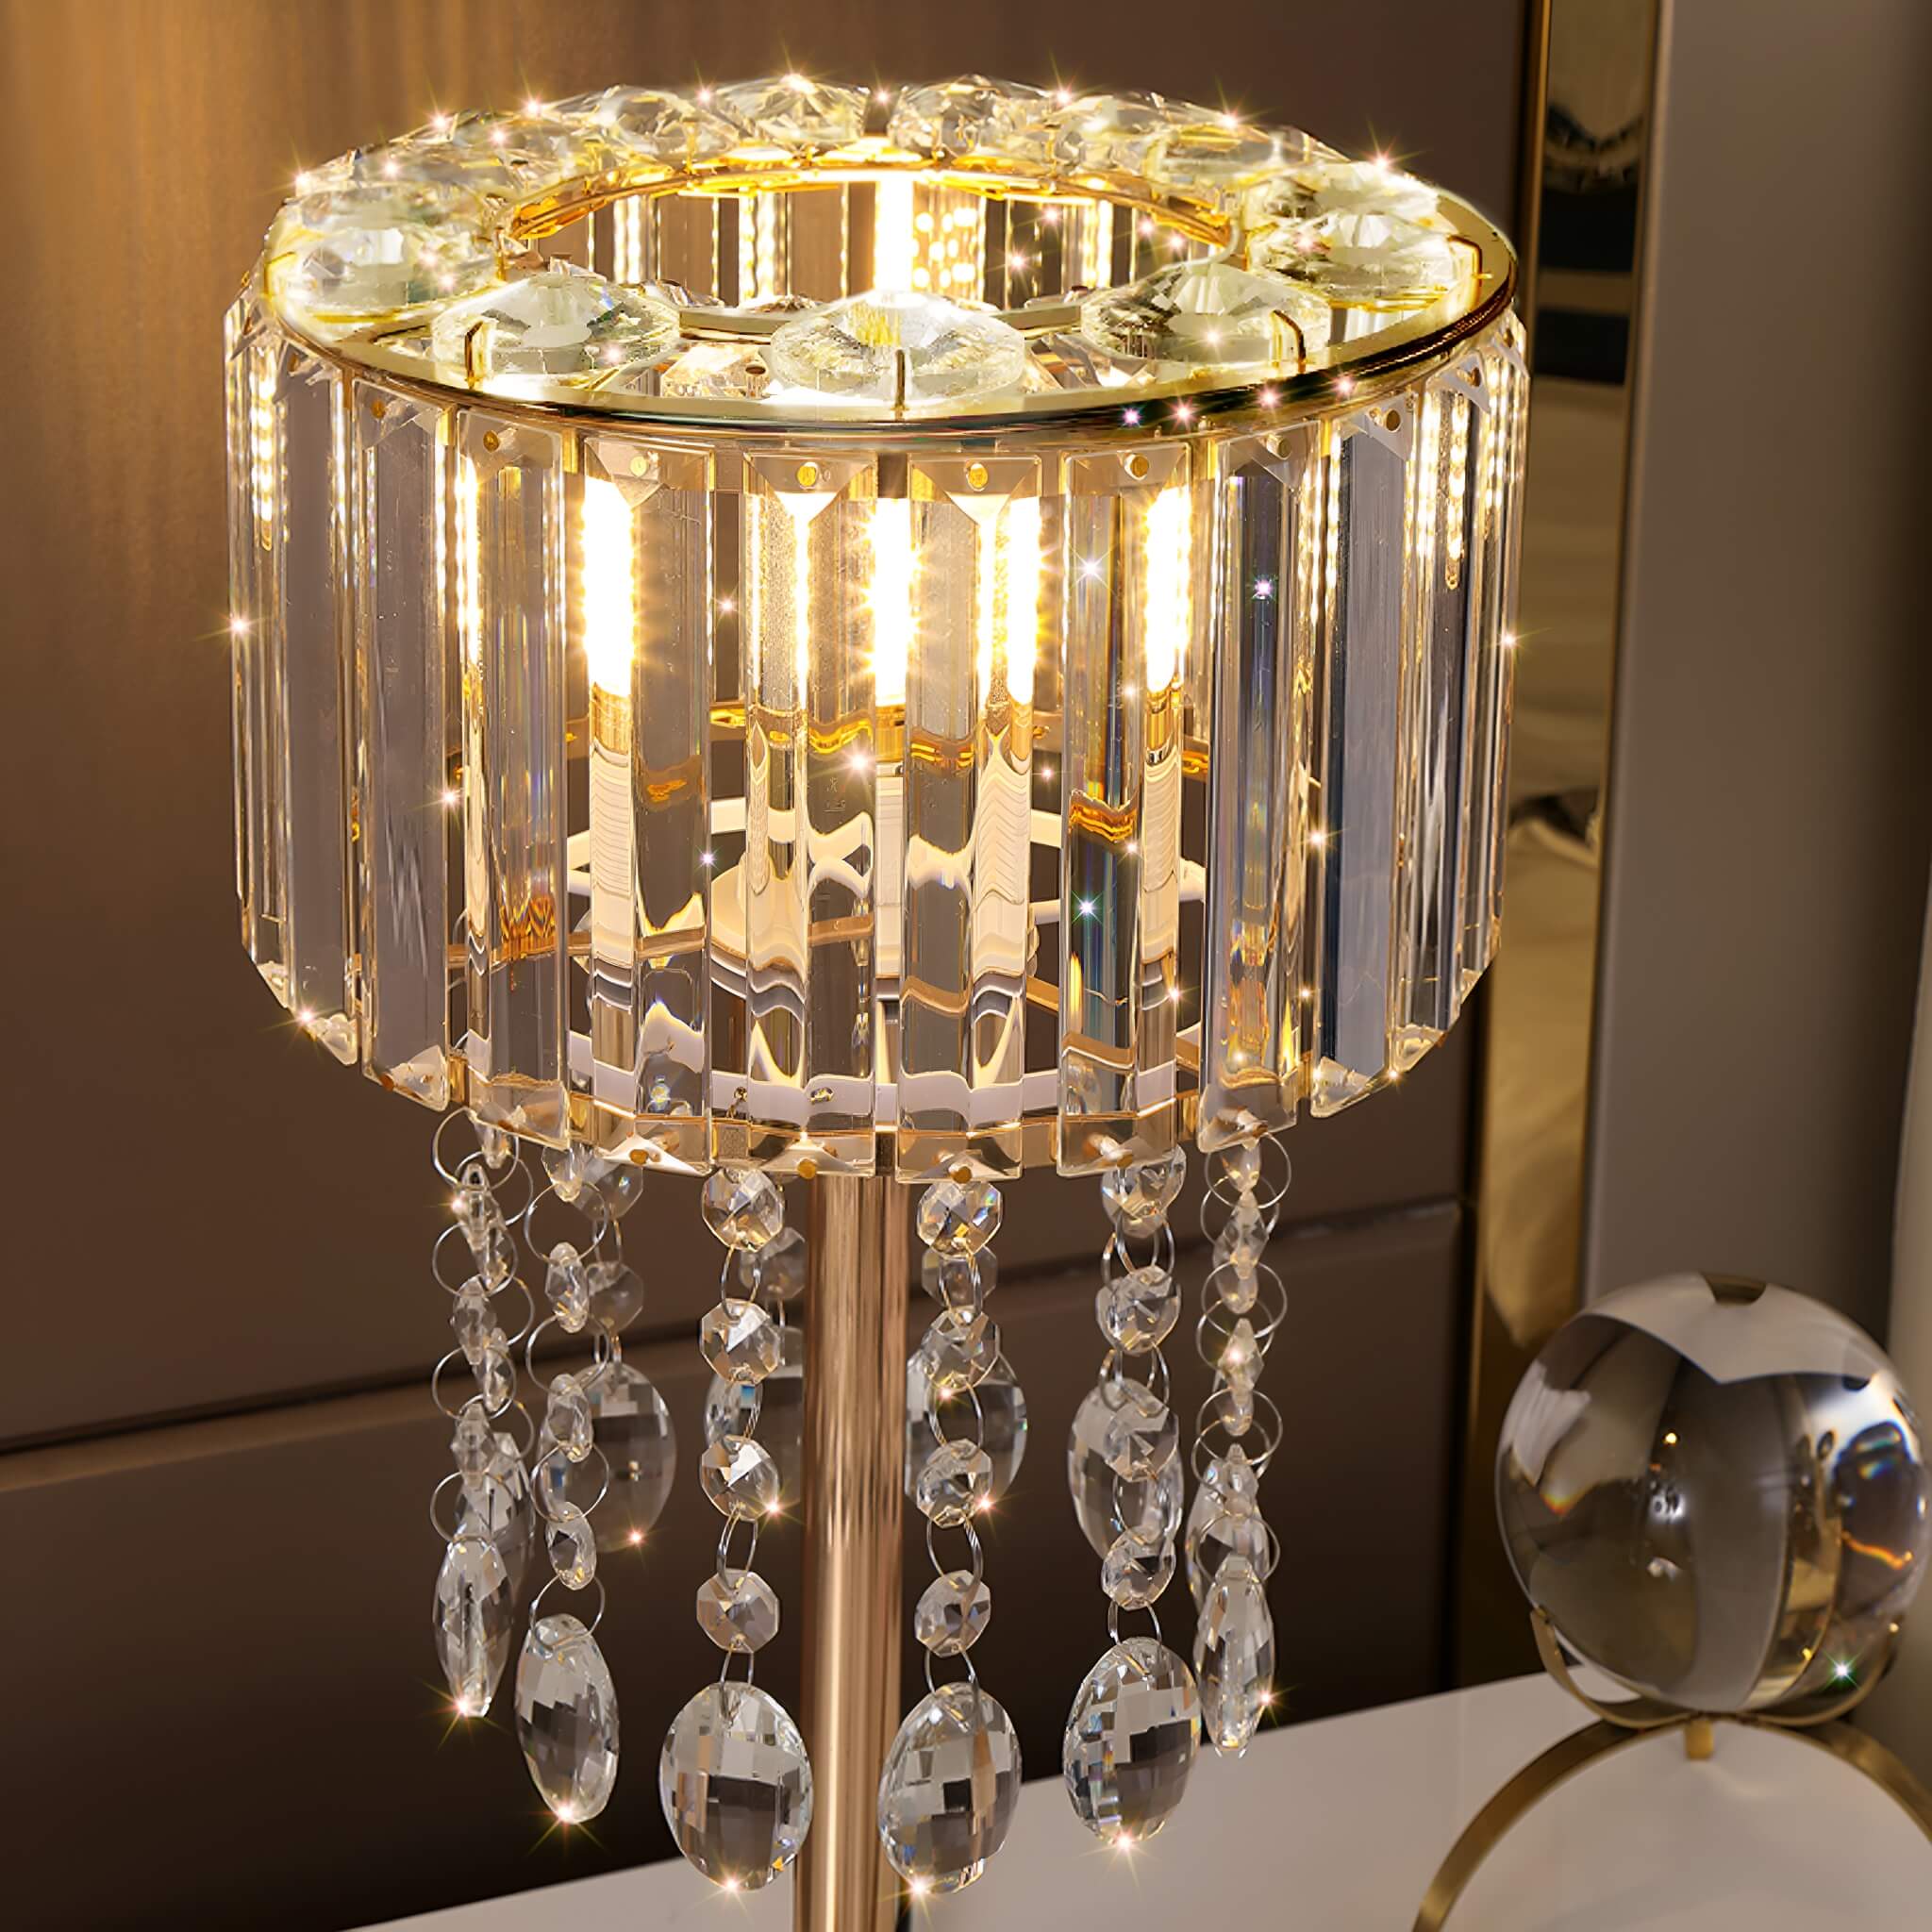 Luxury Gold Finish Lamp with Sparkling Crystal Details -details-1|Sofary